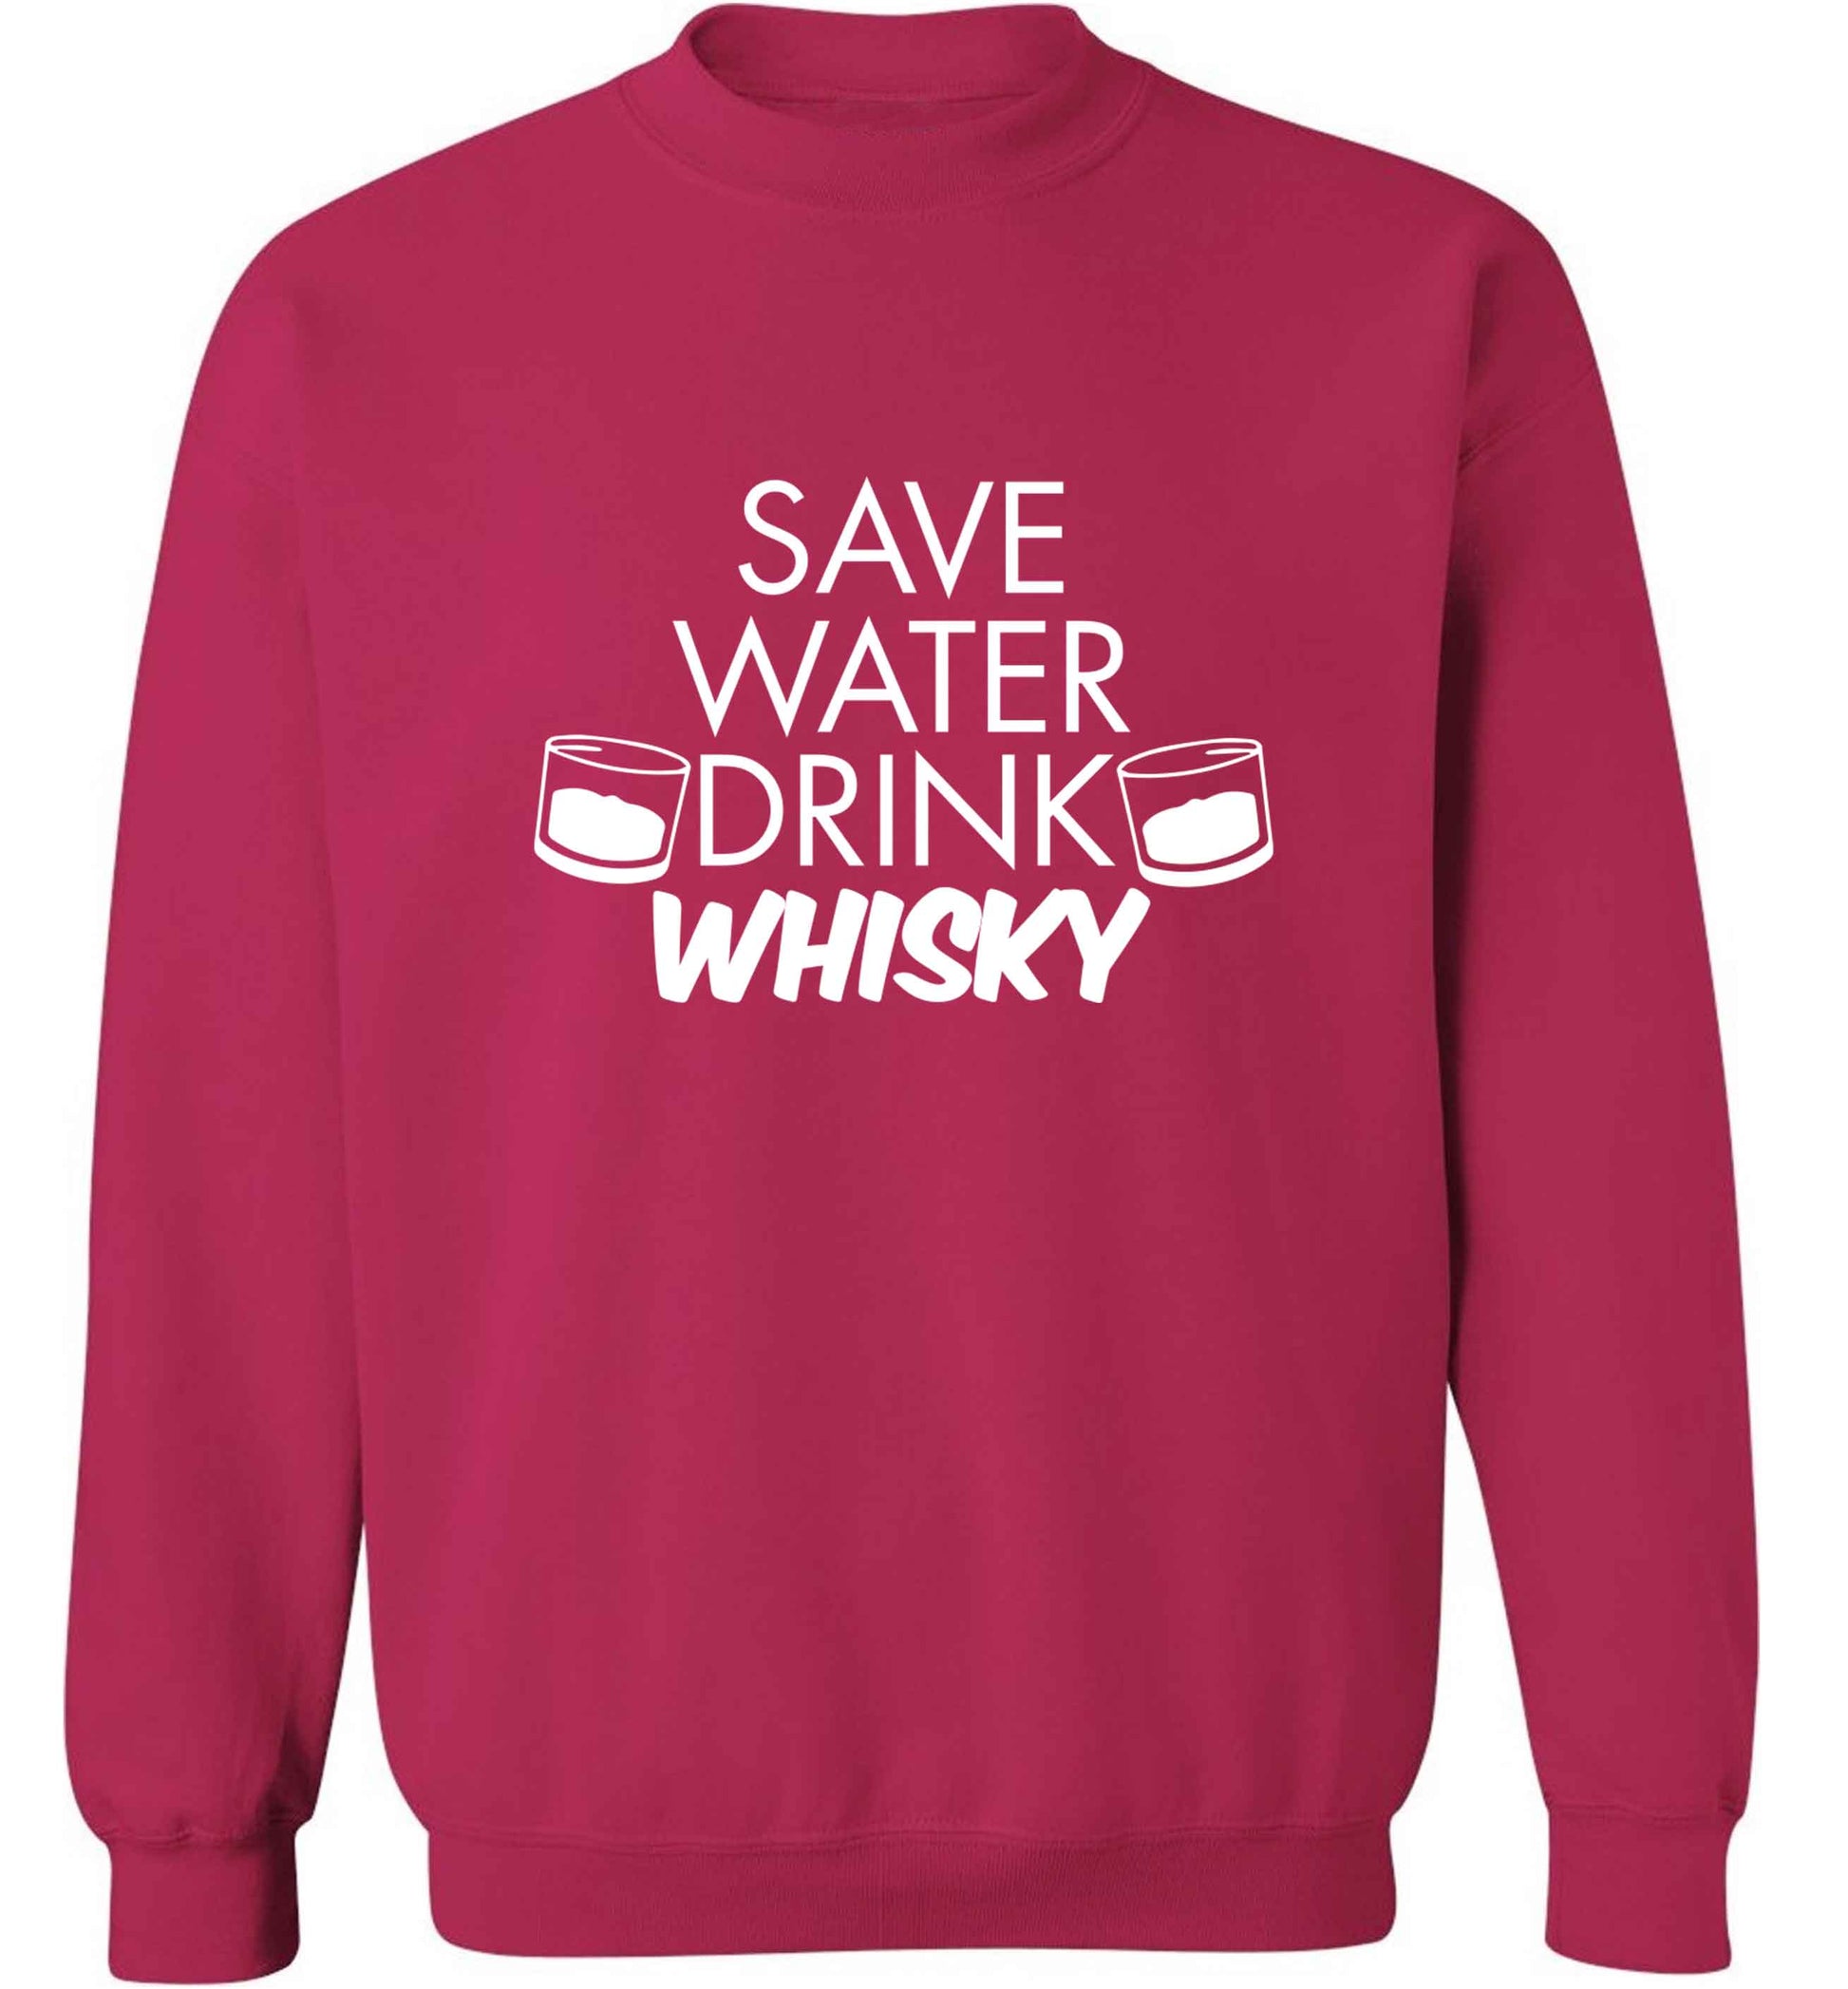 Save water drink whisky adult's unisex pink sweater 2XL